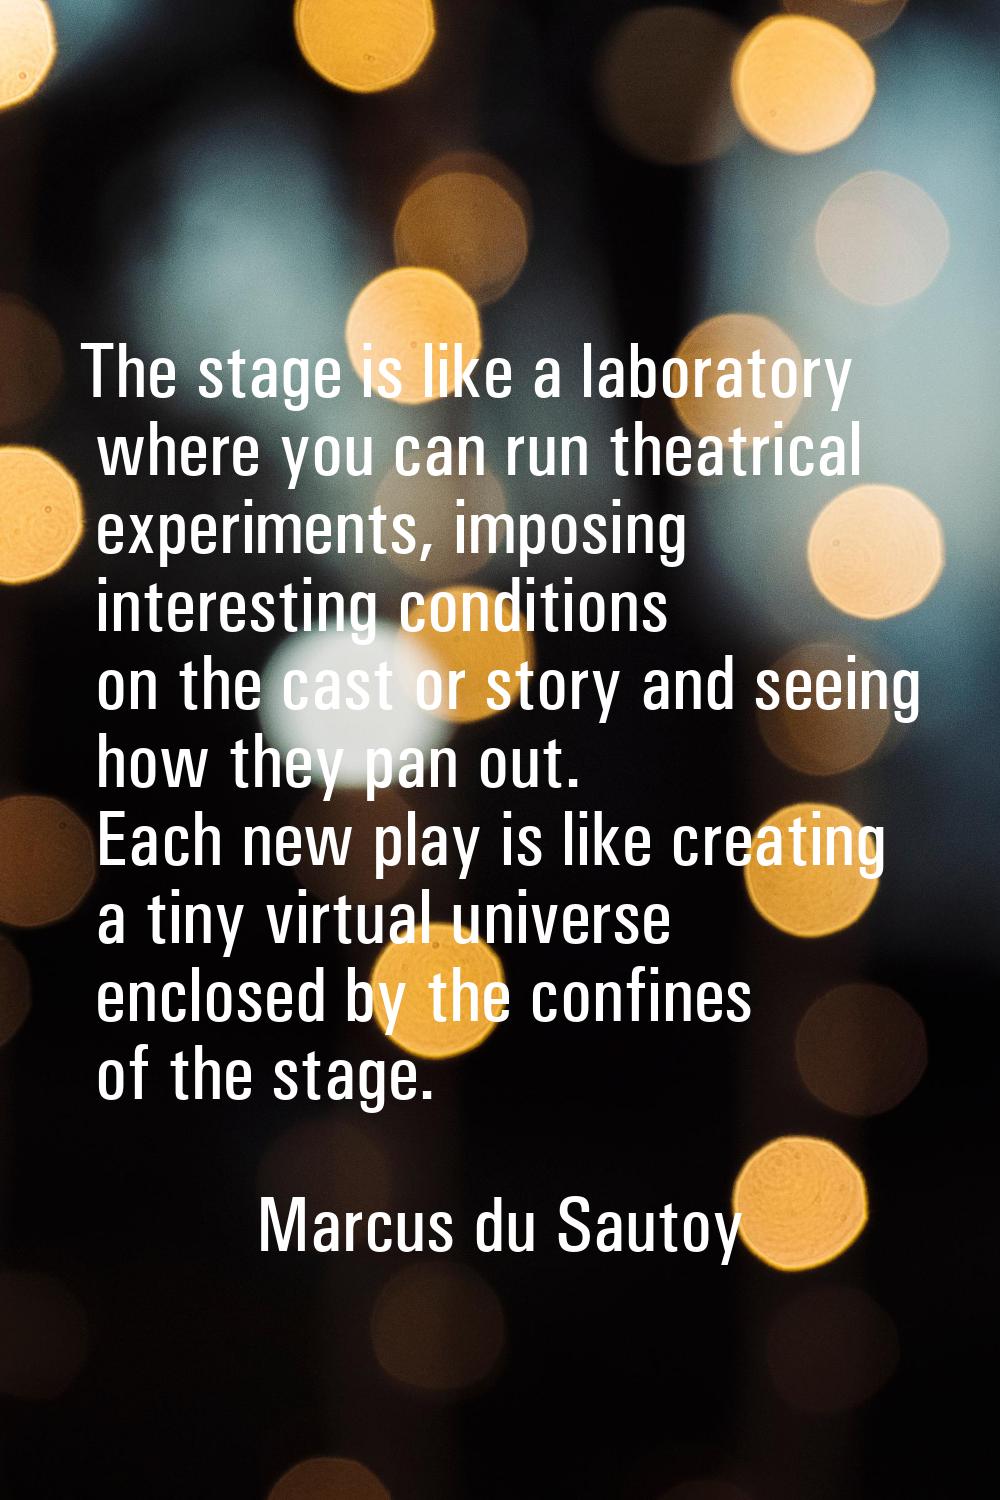 The stage is like a laboratory where you can run theatrical experiments, imposing interesting condi